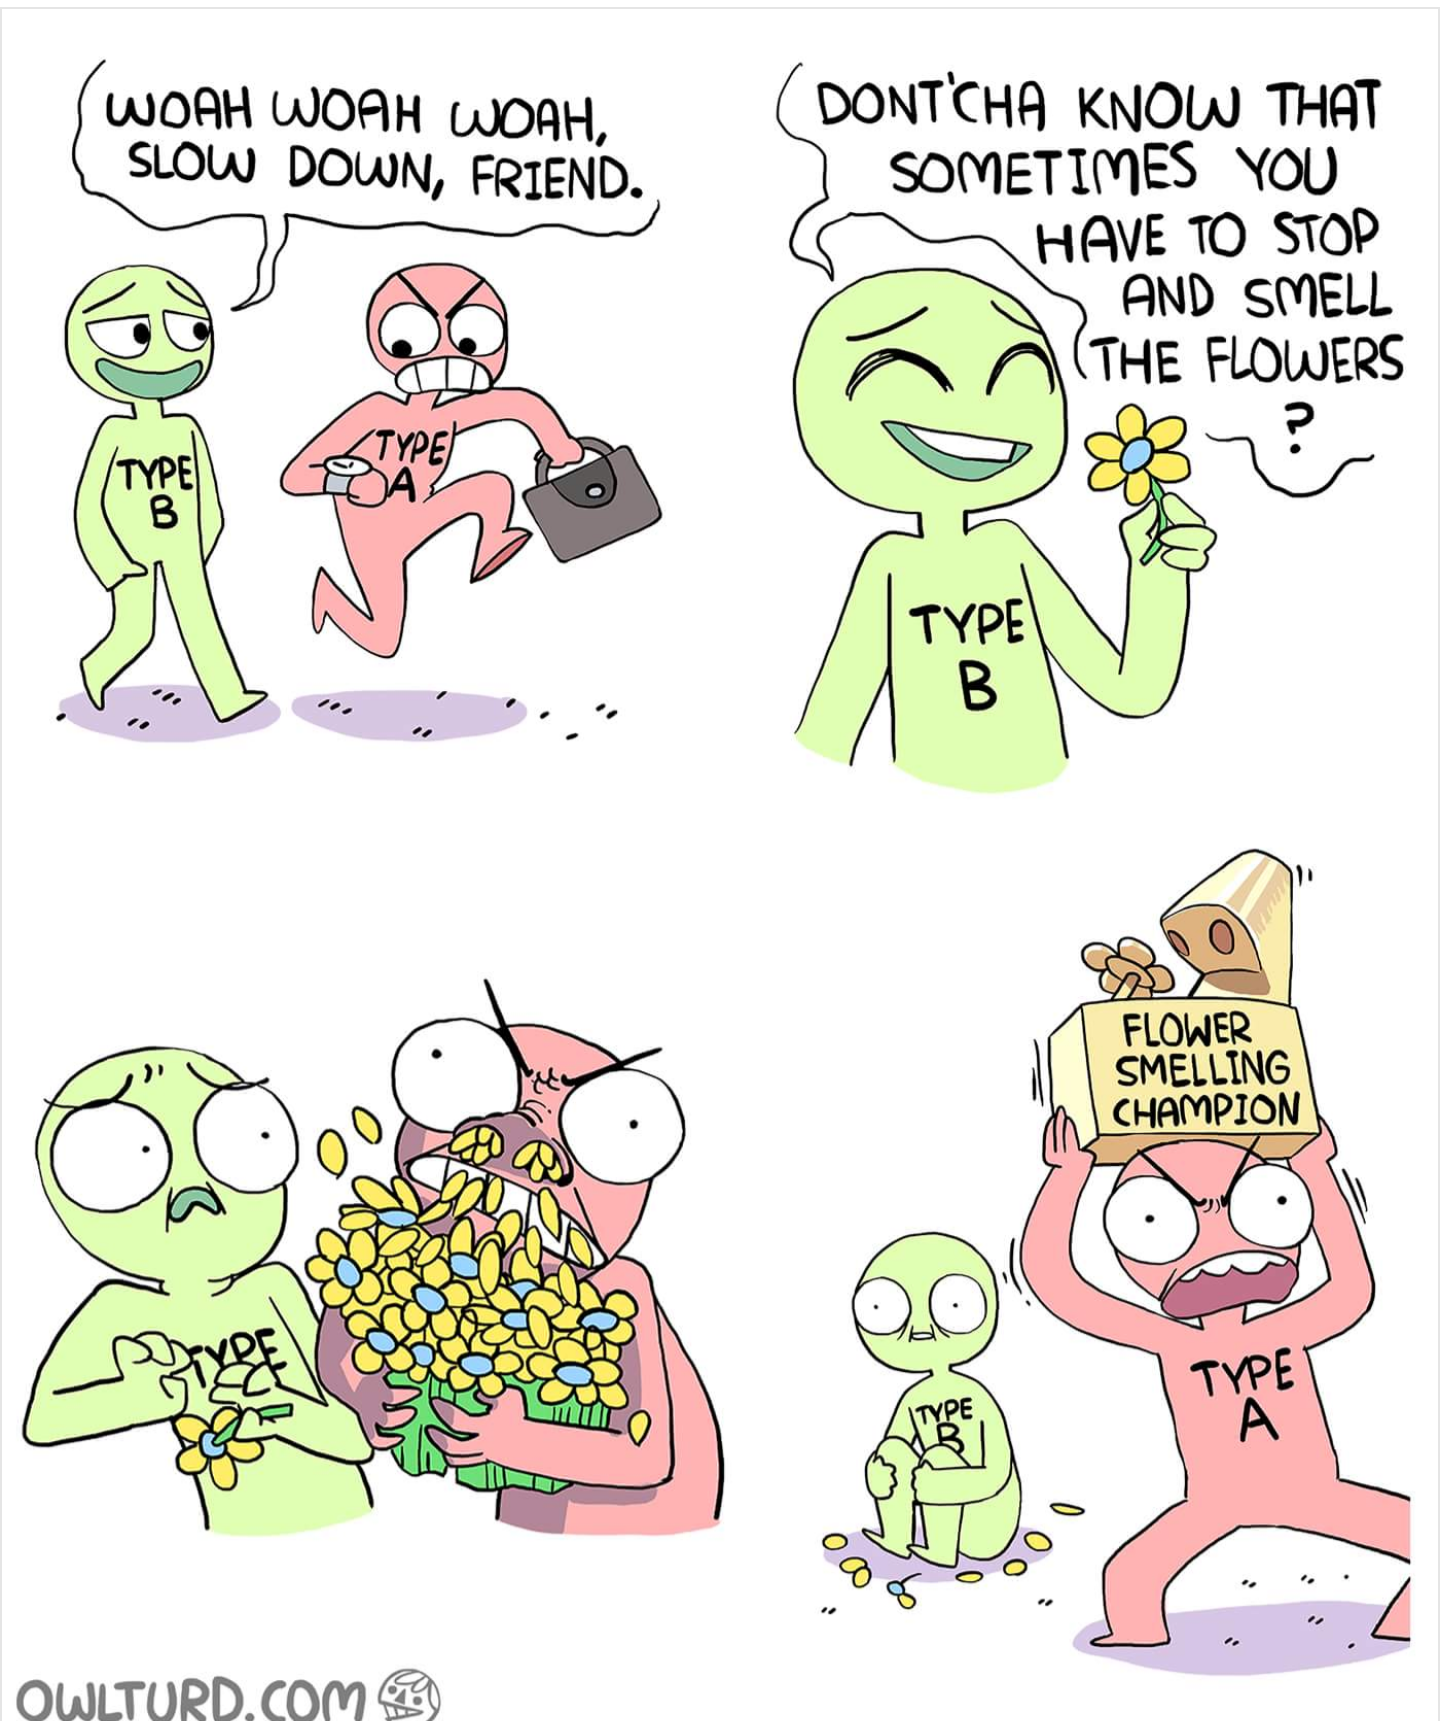 funny memes - flower smelling champion - Woah Woah Woah, Slow Down, Friend. Dont Cha Know That Sometimes You Have To Stop > And Smell The Flowers Sze Type Estre Type C Flower Smelling Champion Type Ay Owlturd.Com